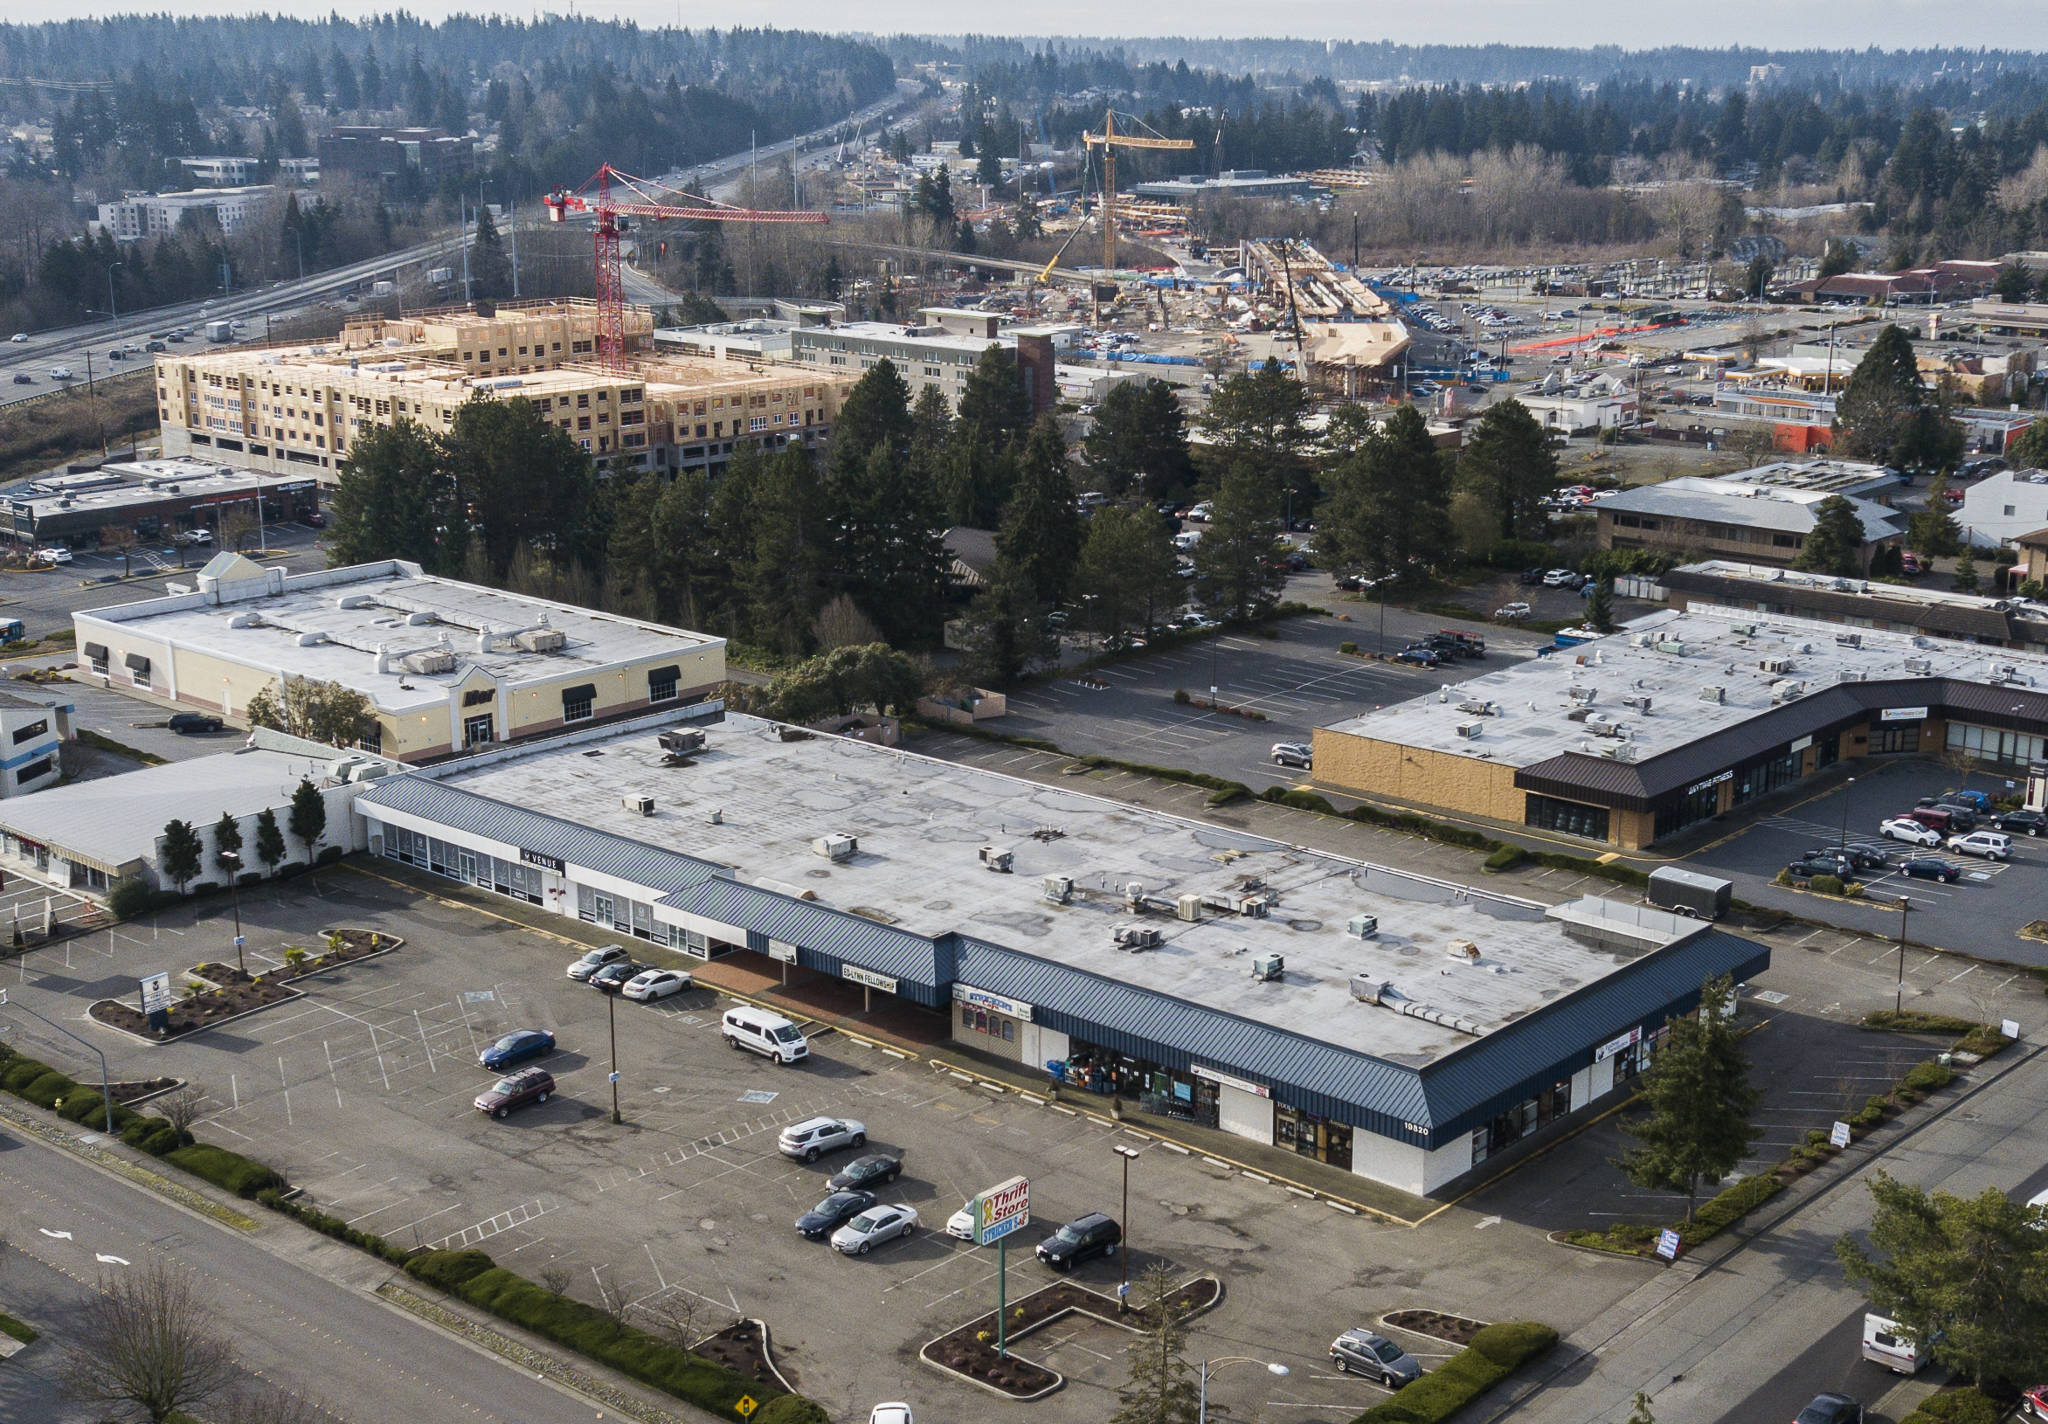 The Lynnwood strip-mall site (bottom) where Trent Development hopes to build 350 studio, one-bedroom and two-bedroom apartments. In the background is the Sound Transit Link light rail station that is under construction. (Olivia Vanni / The Herald)